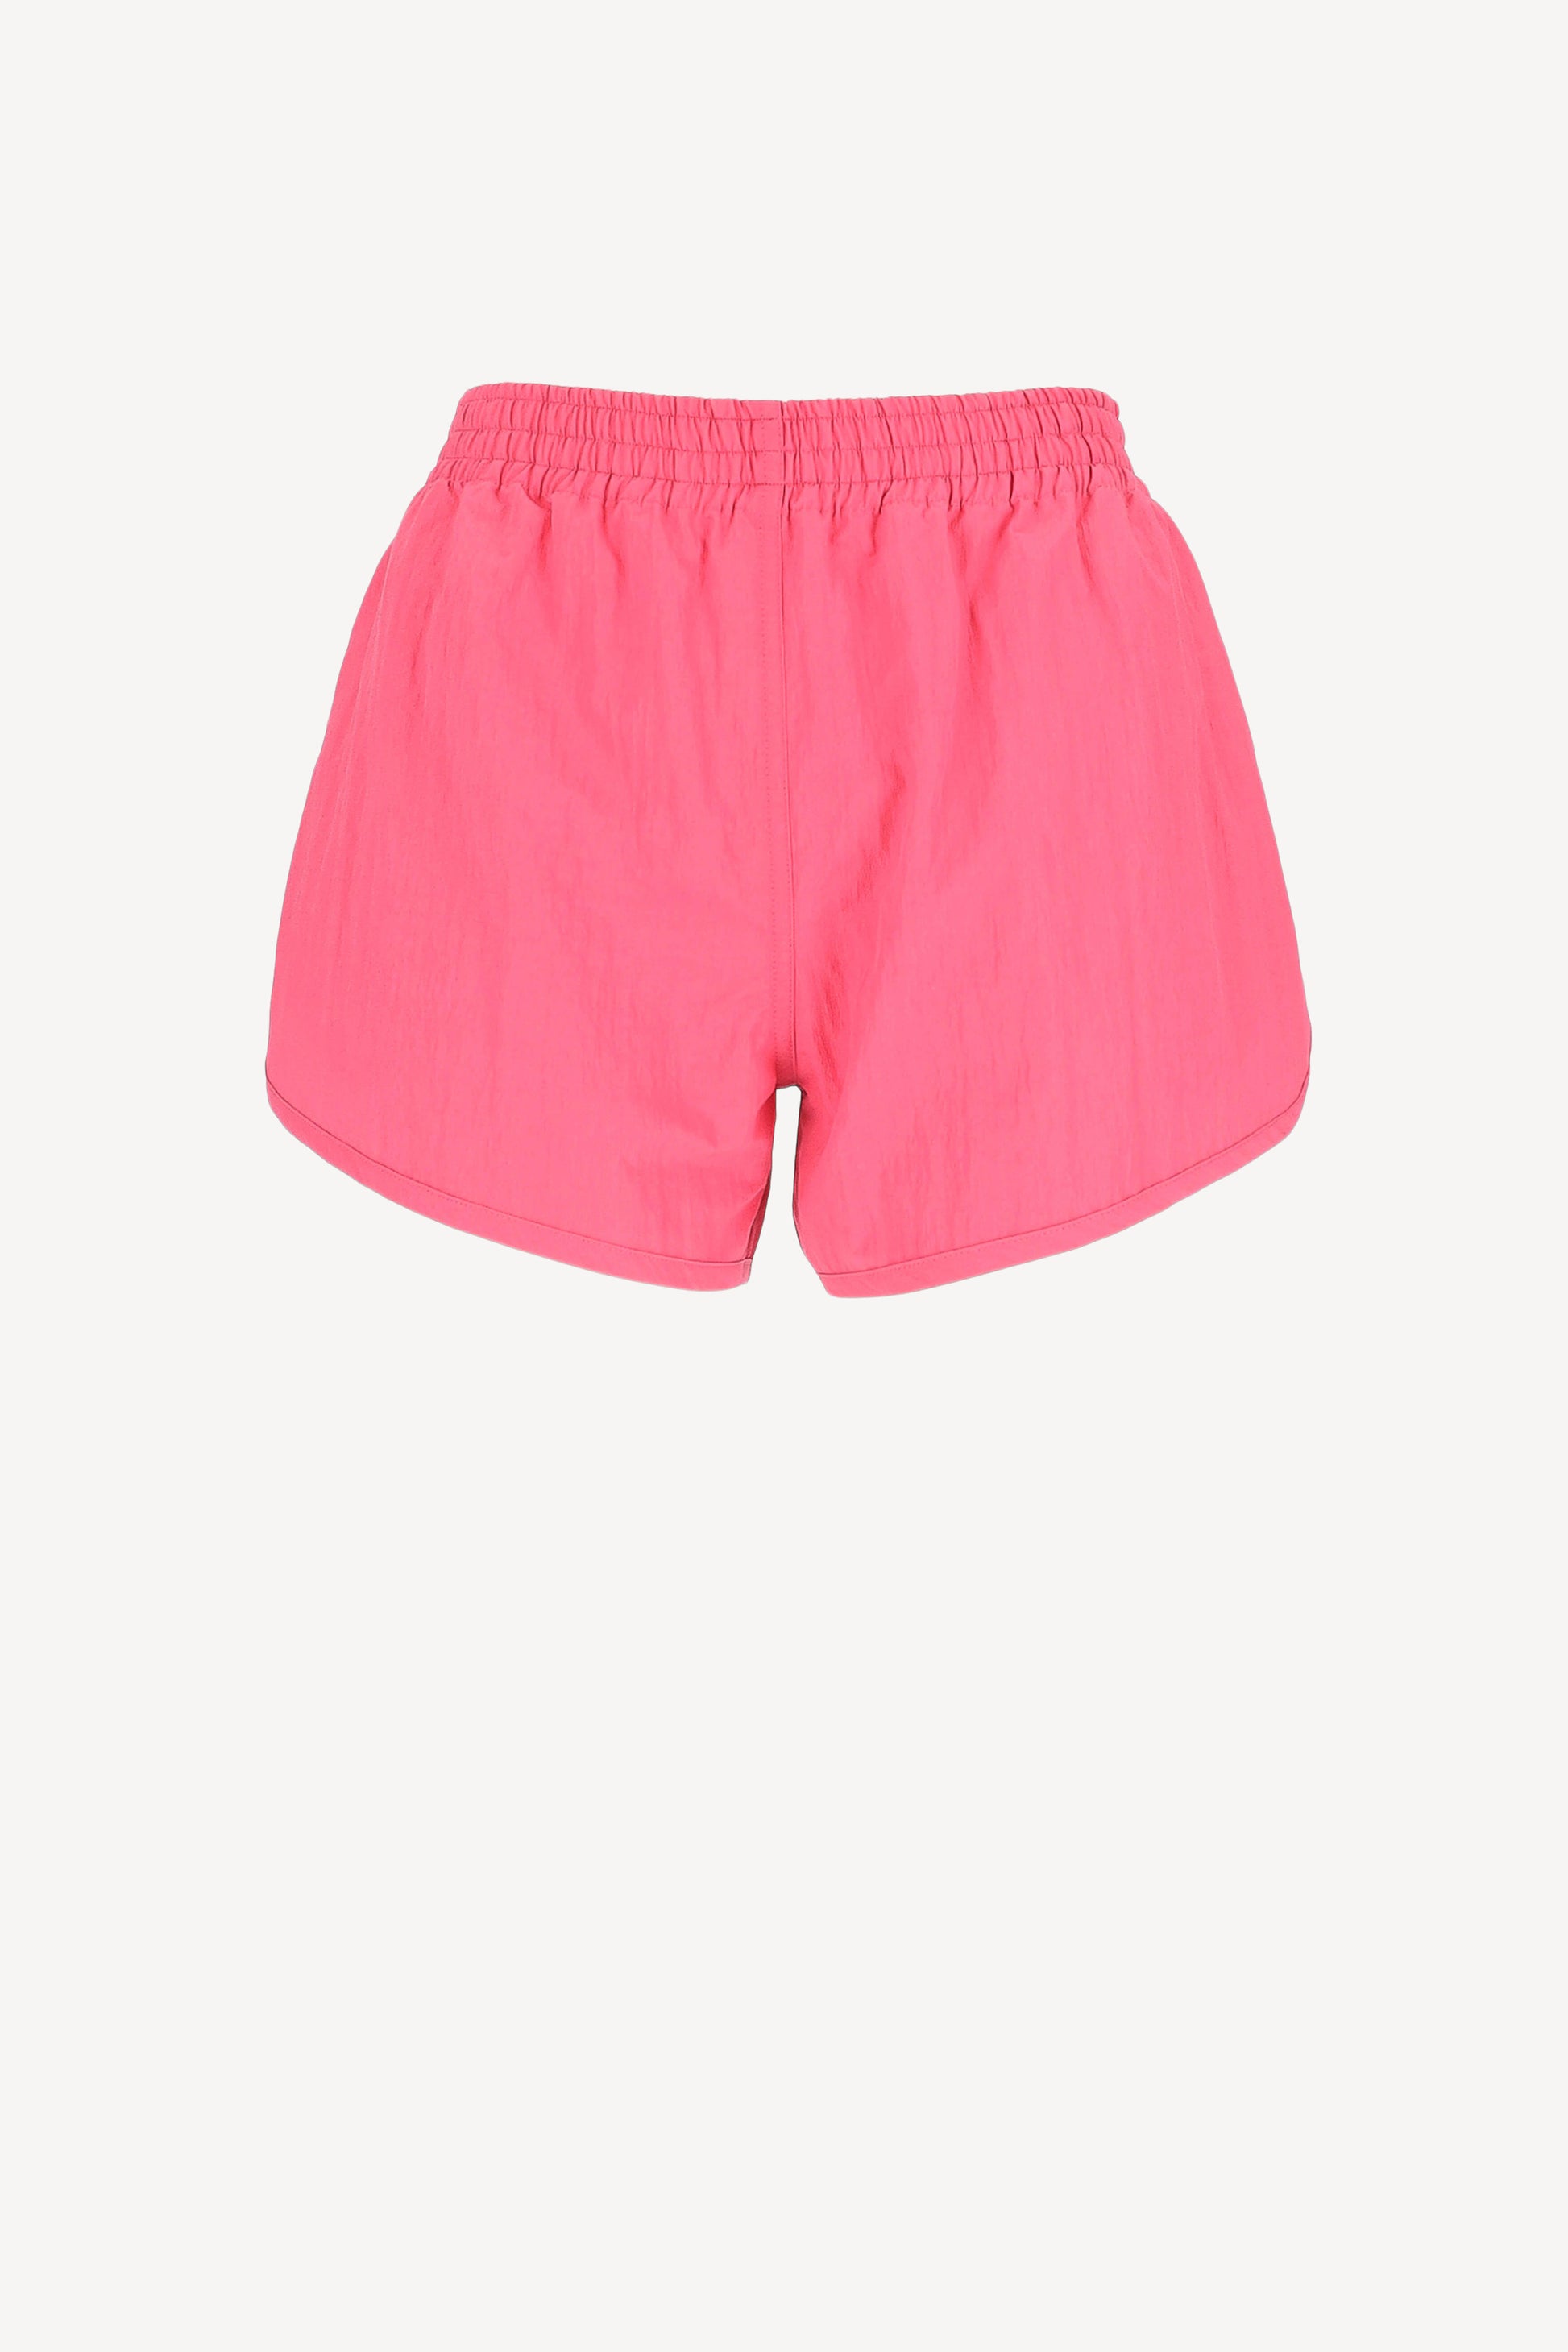 Shorts Running in PinkJW Anderson - Anita Hass